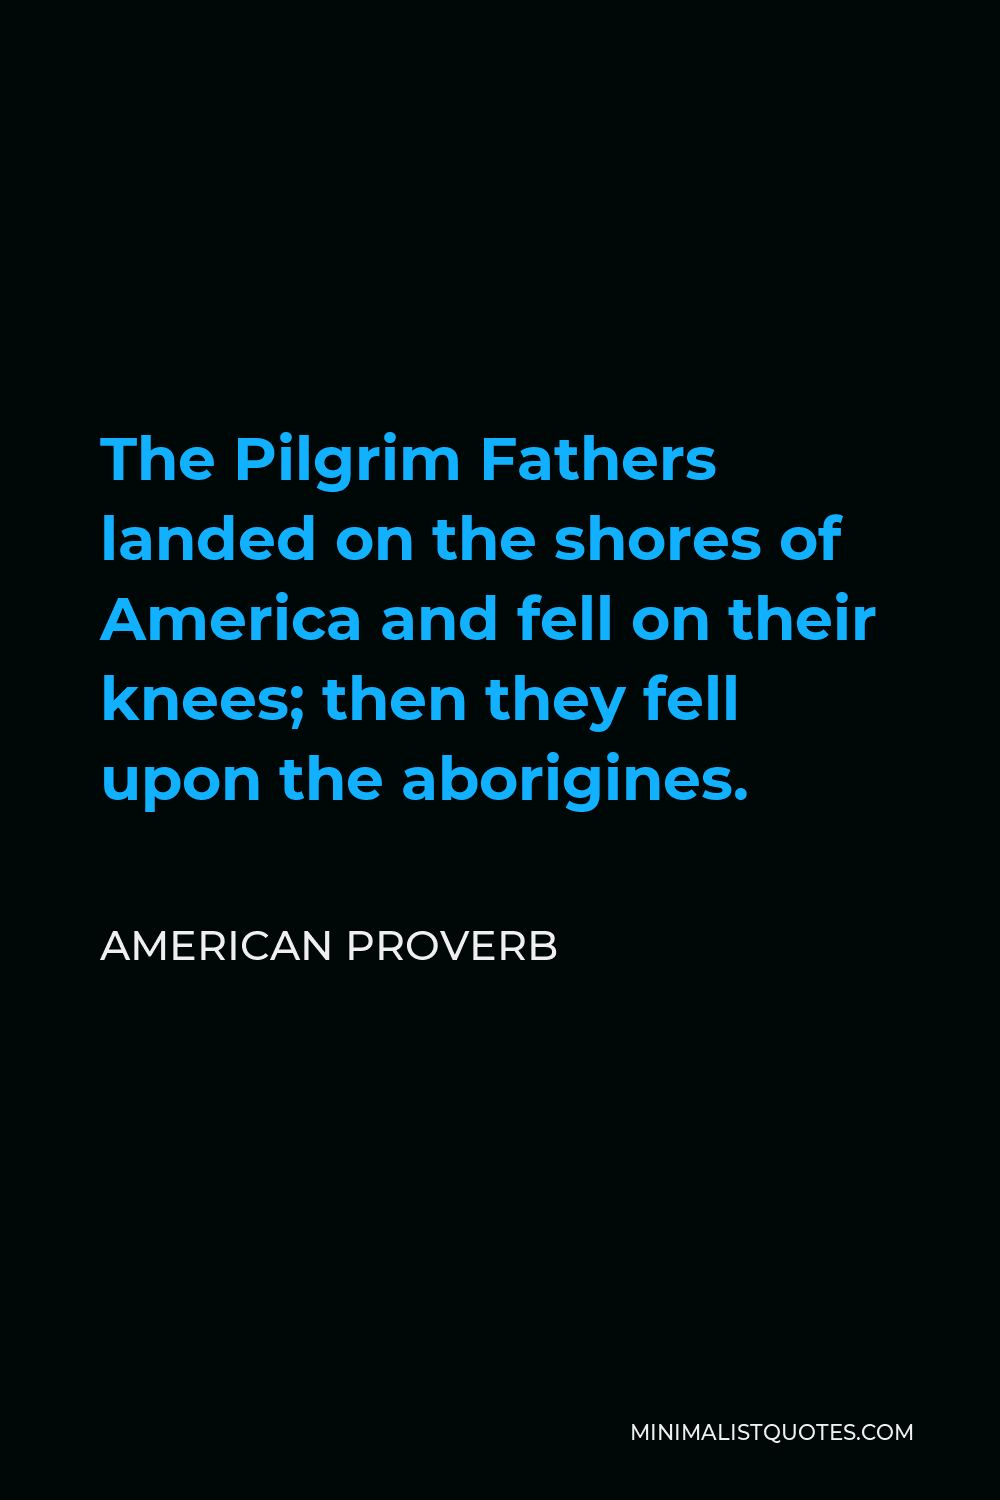 American Proverb Quote - The Pilgrim Fathers landed on the shores of America and fell on their knees; then they fell upon the aborigines.